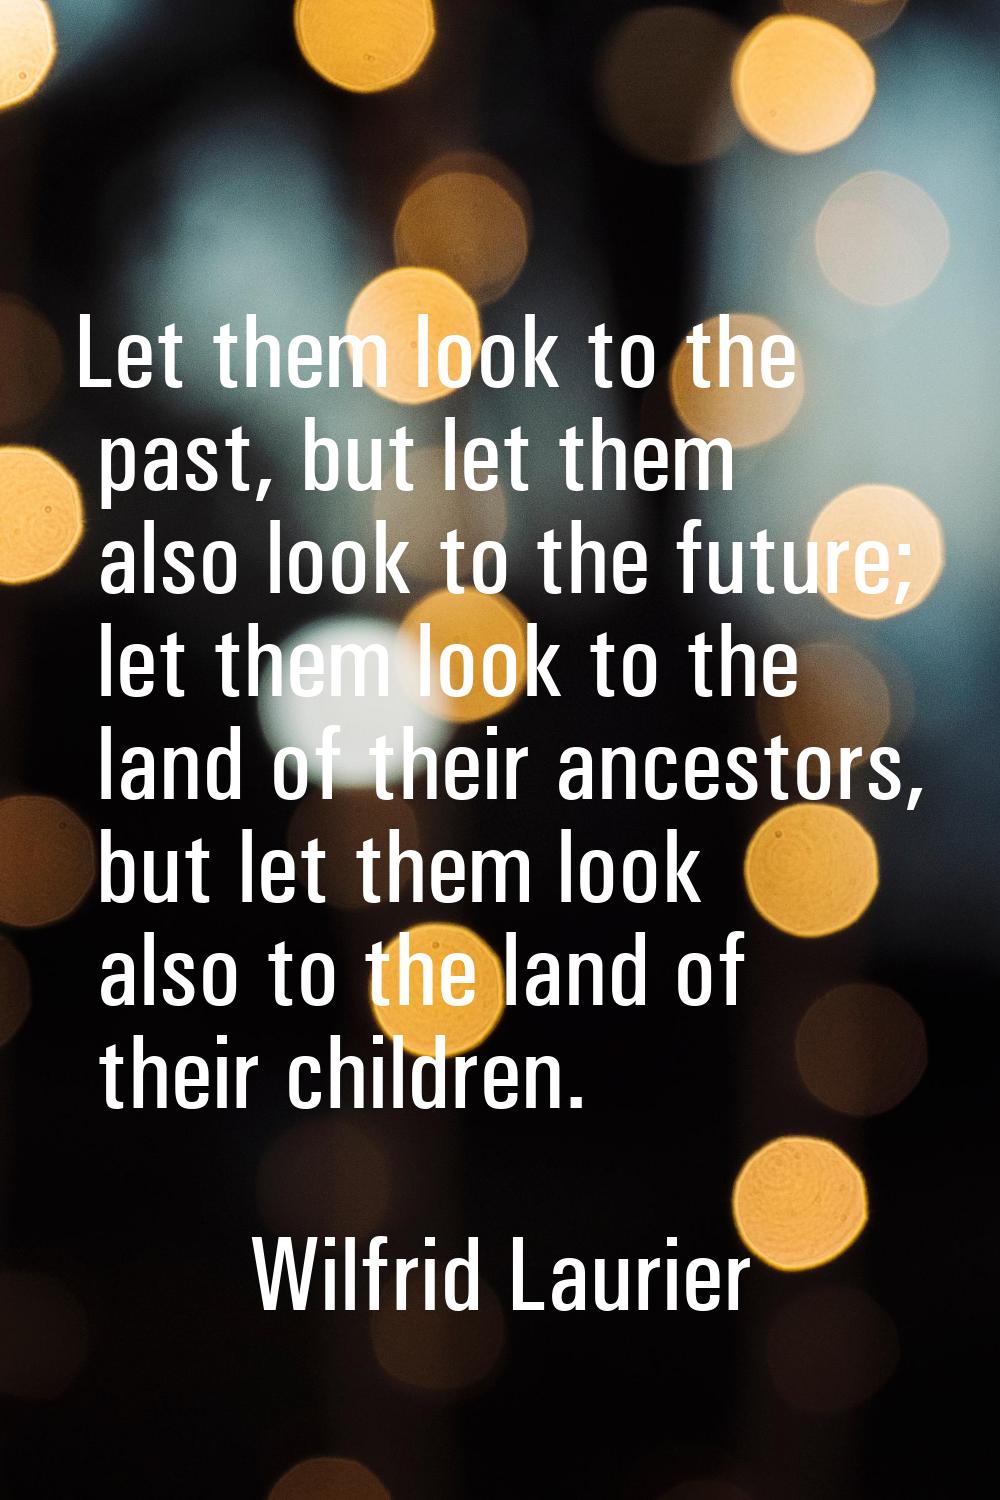 Let them look to the past, but let them also look to the future; let them look to the land of their